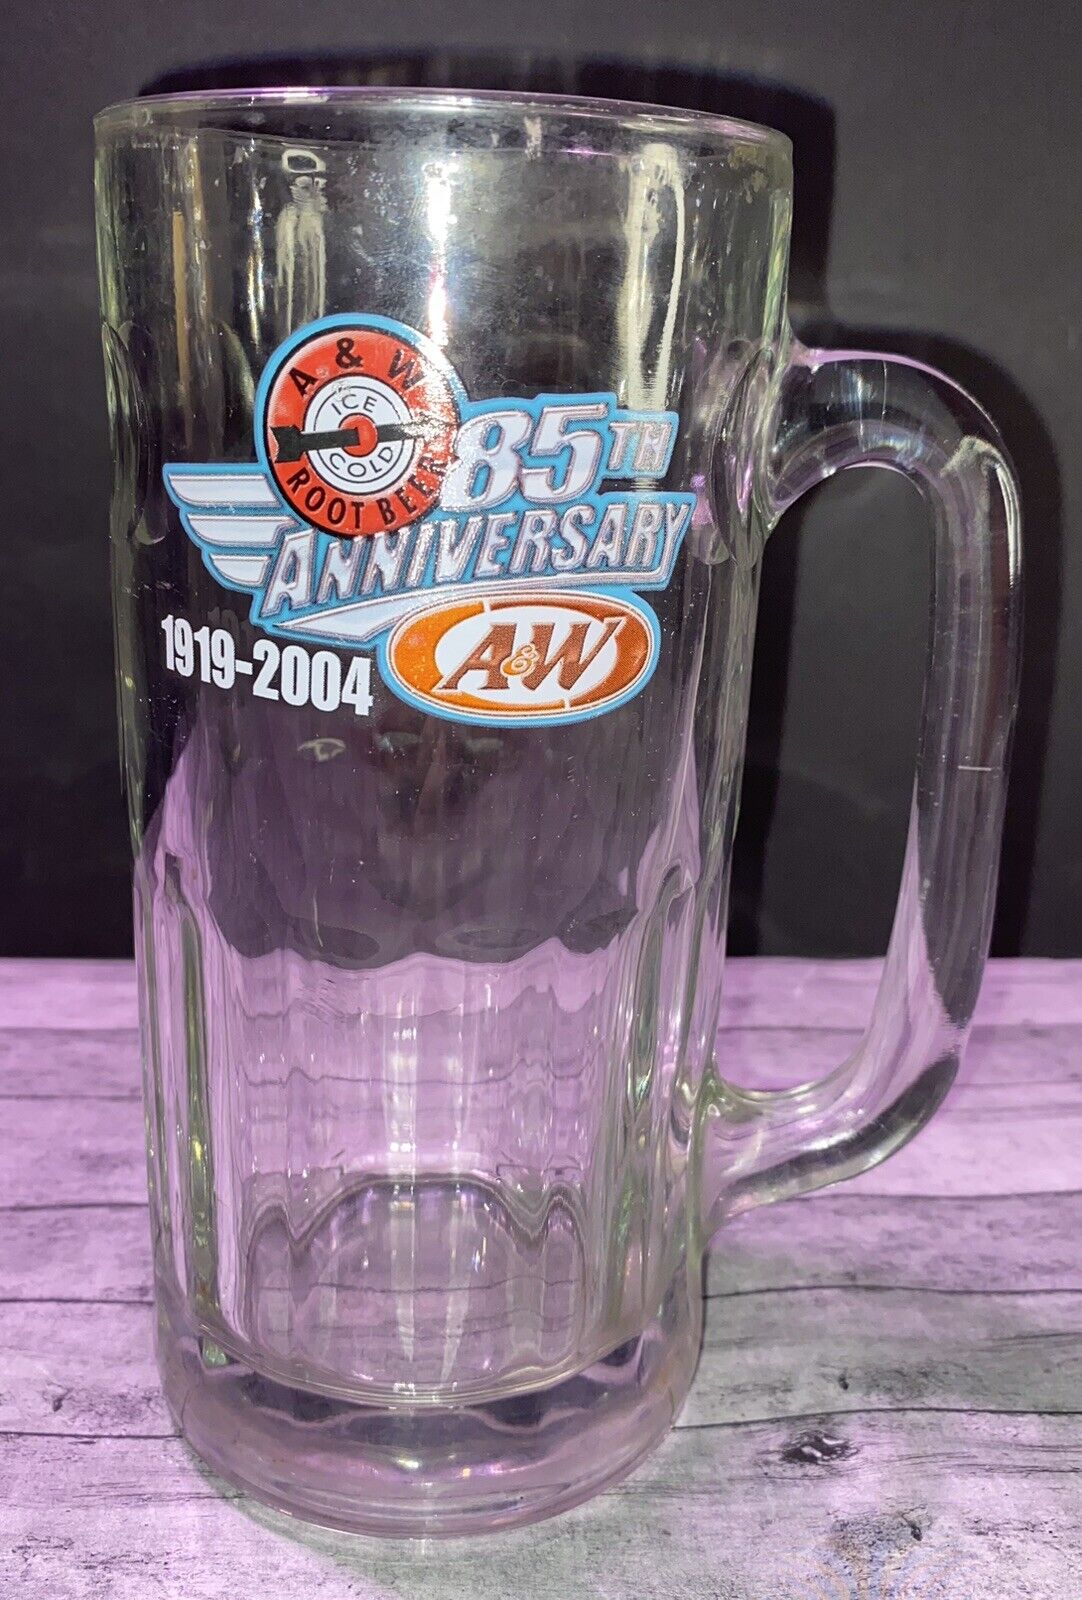 A&W Root Beer 85TH Anniversary 16oz 7” Mug Stein 1919-2004 Handle Dimpled Glass